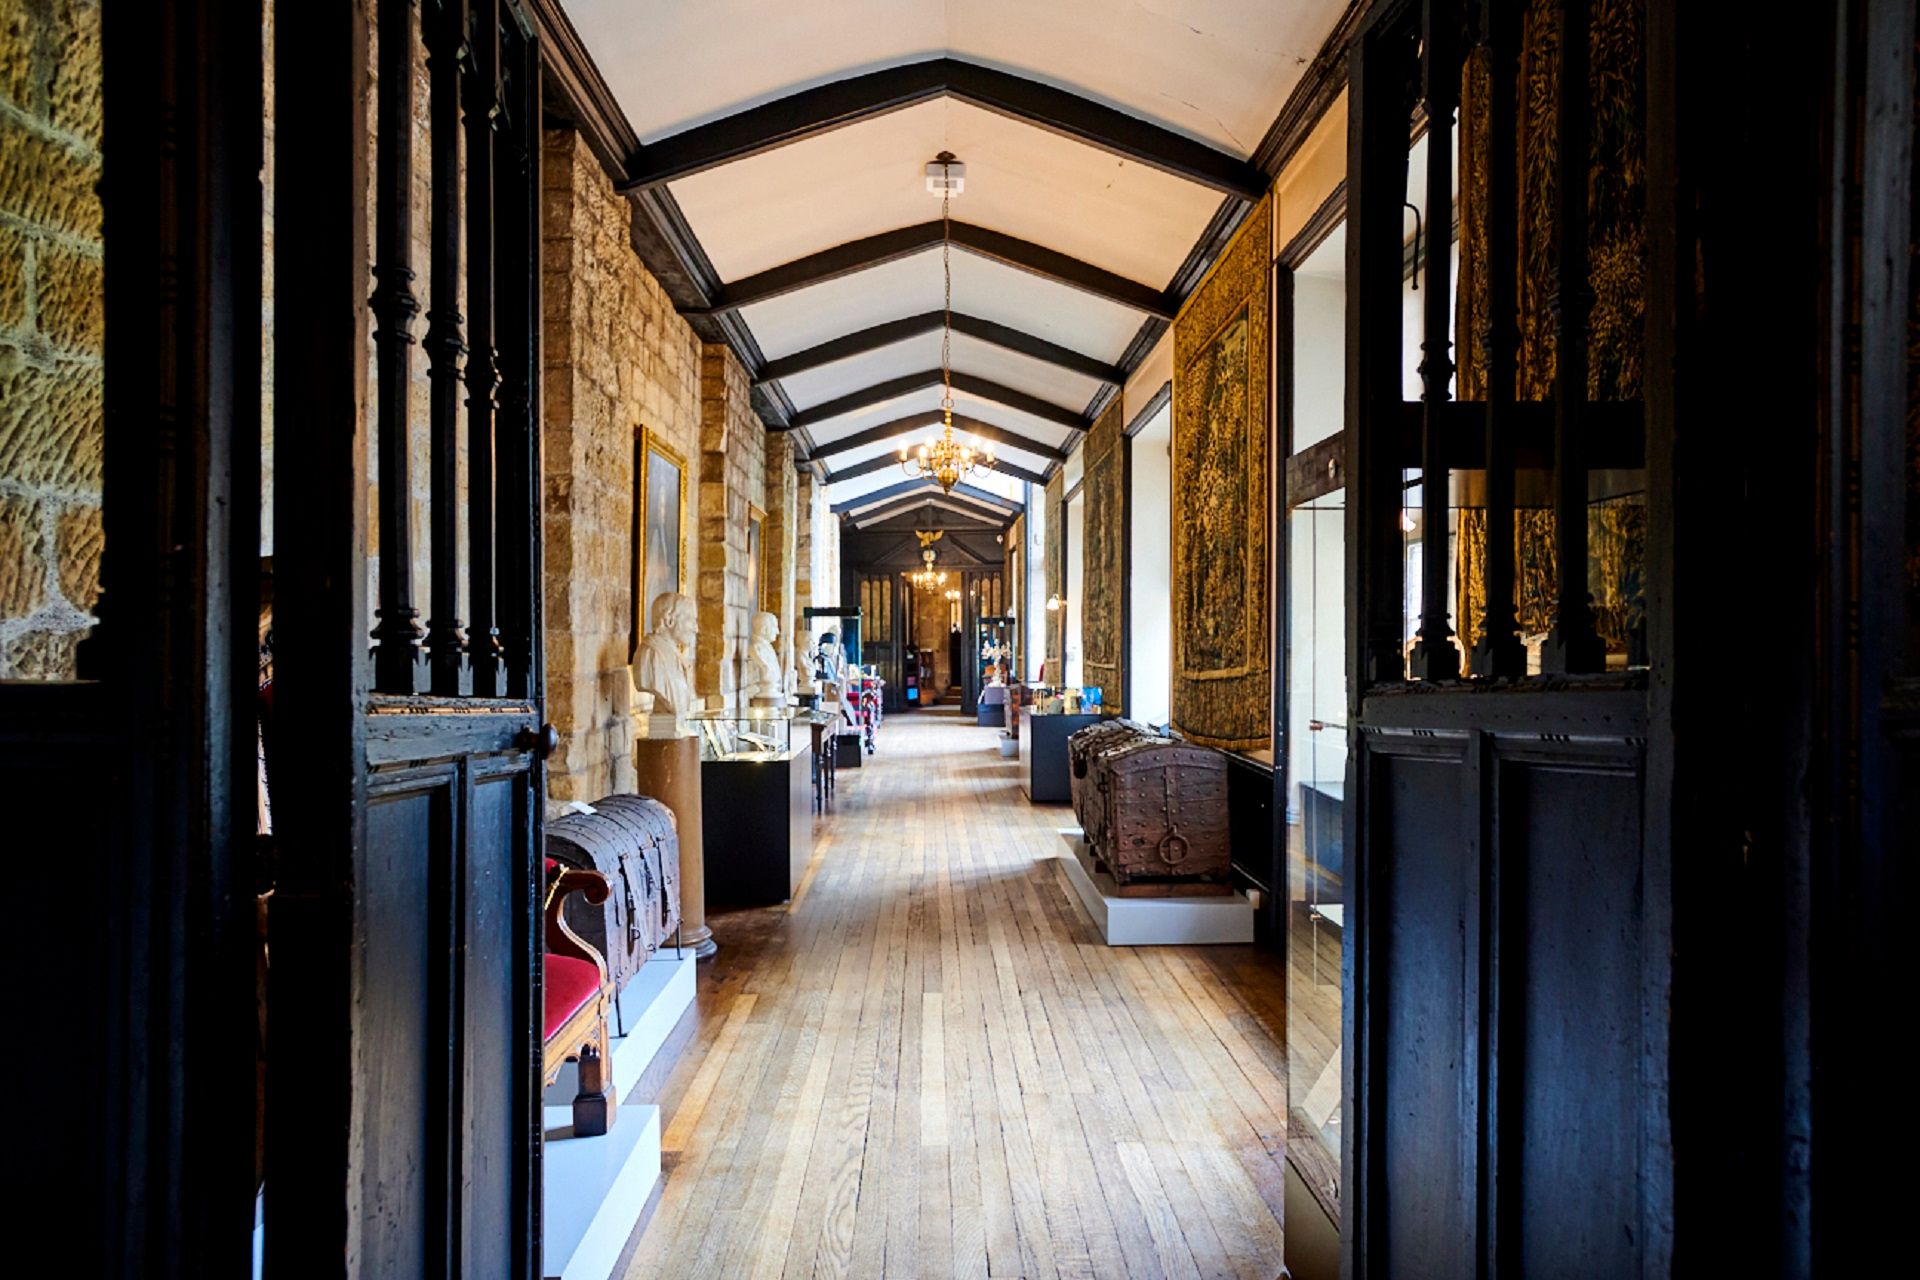 Looking down the Tunstall Gallery in Durham Castle, featuring wooden panelling and the museum displays.